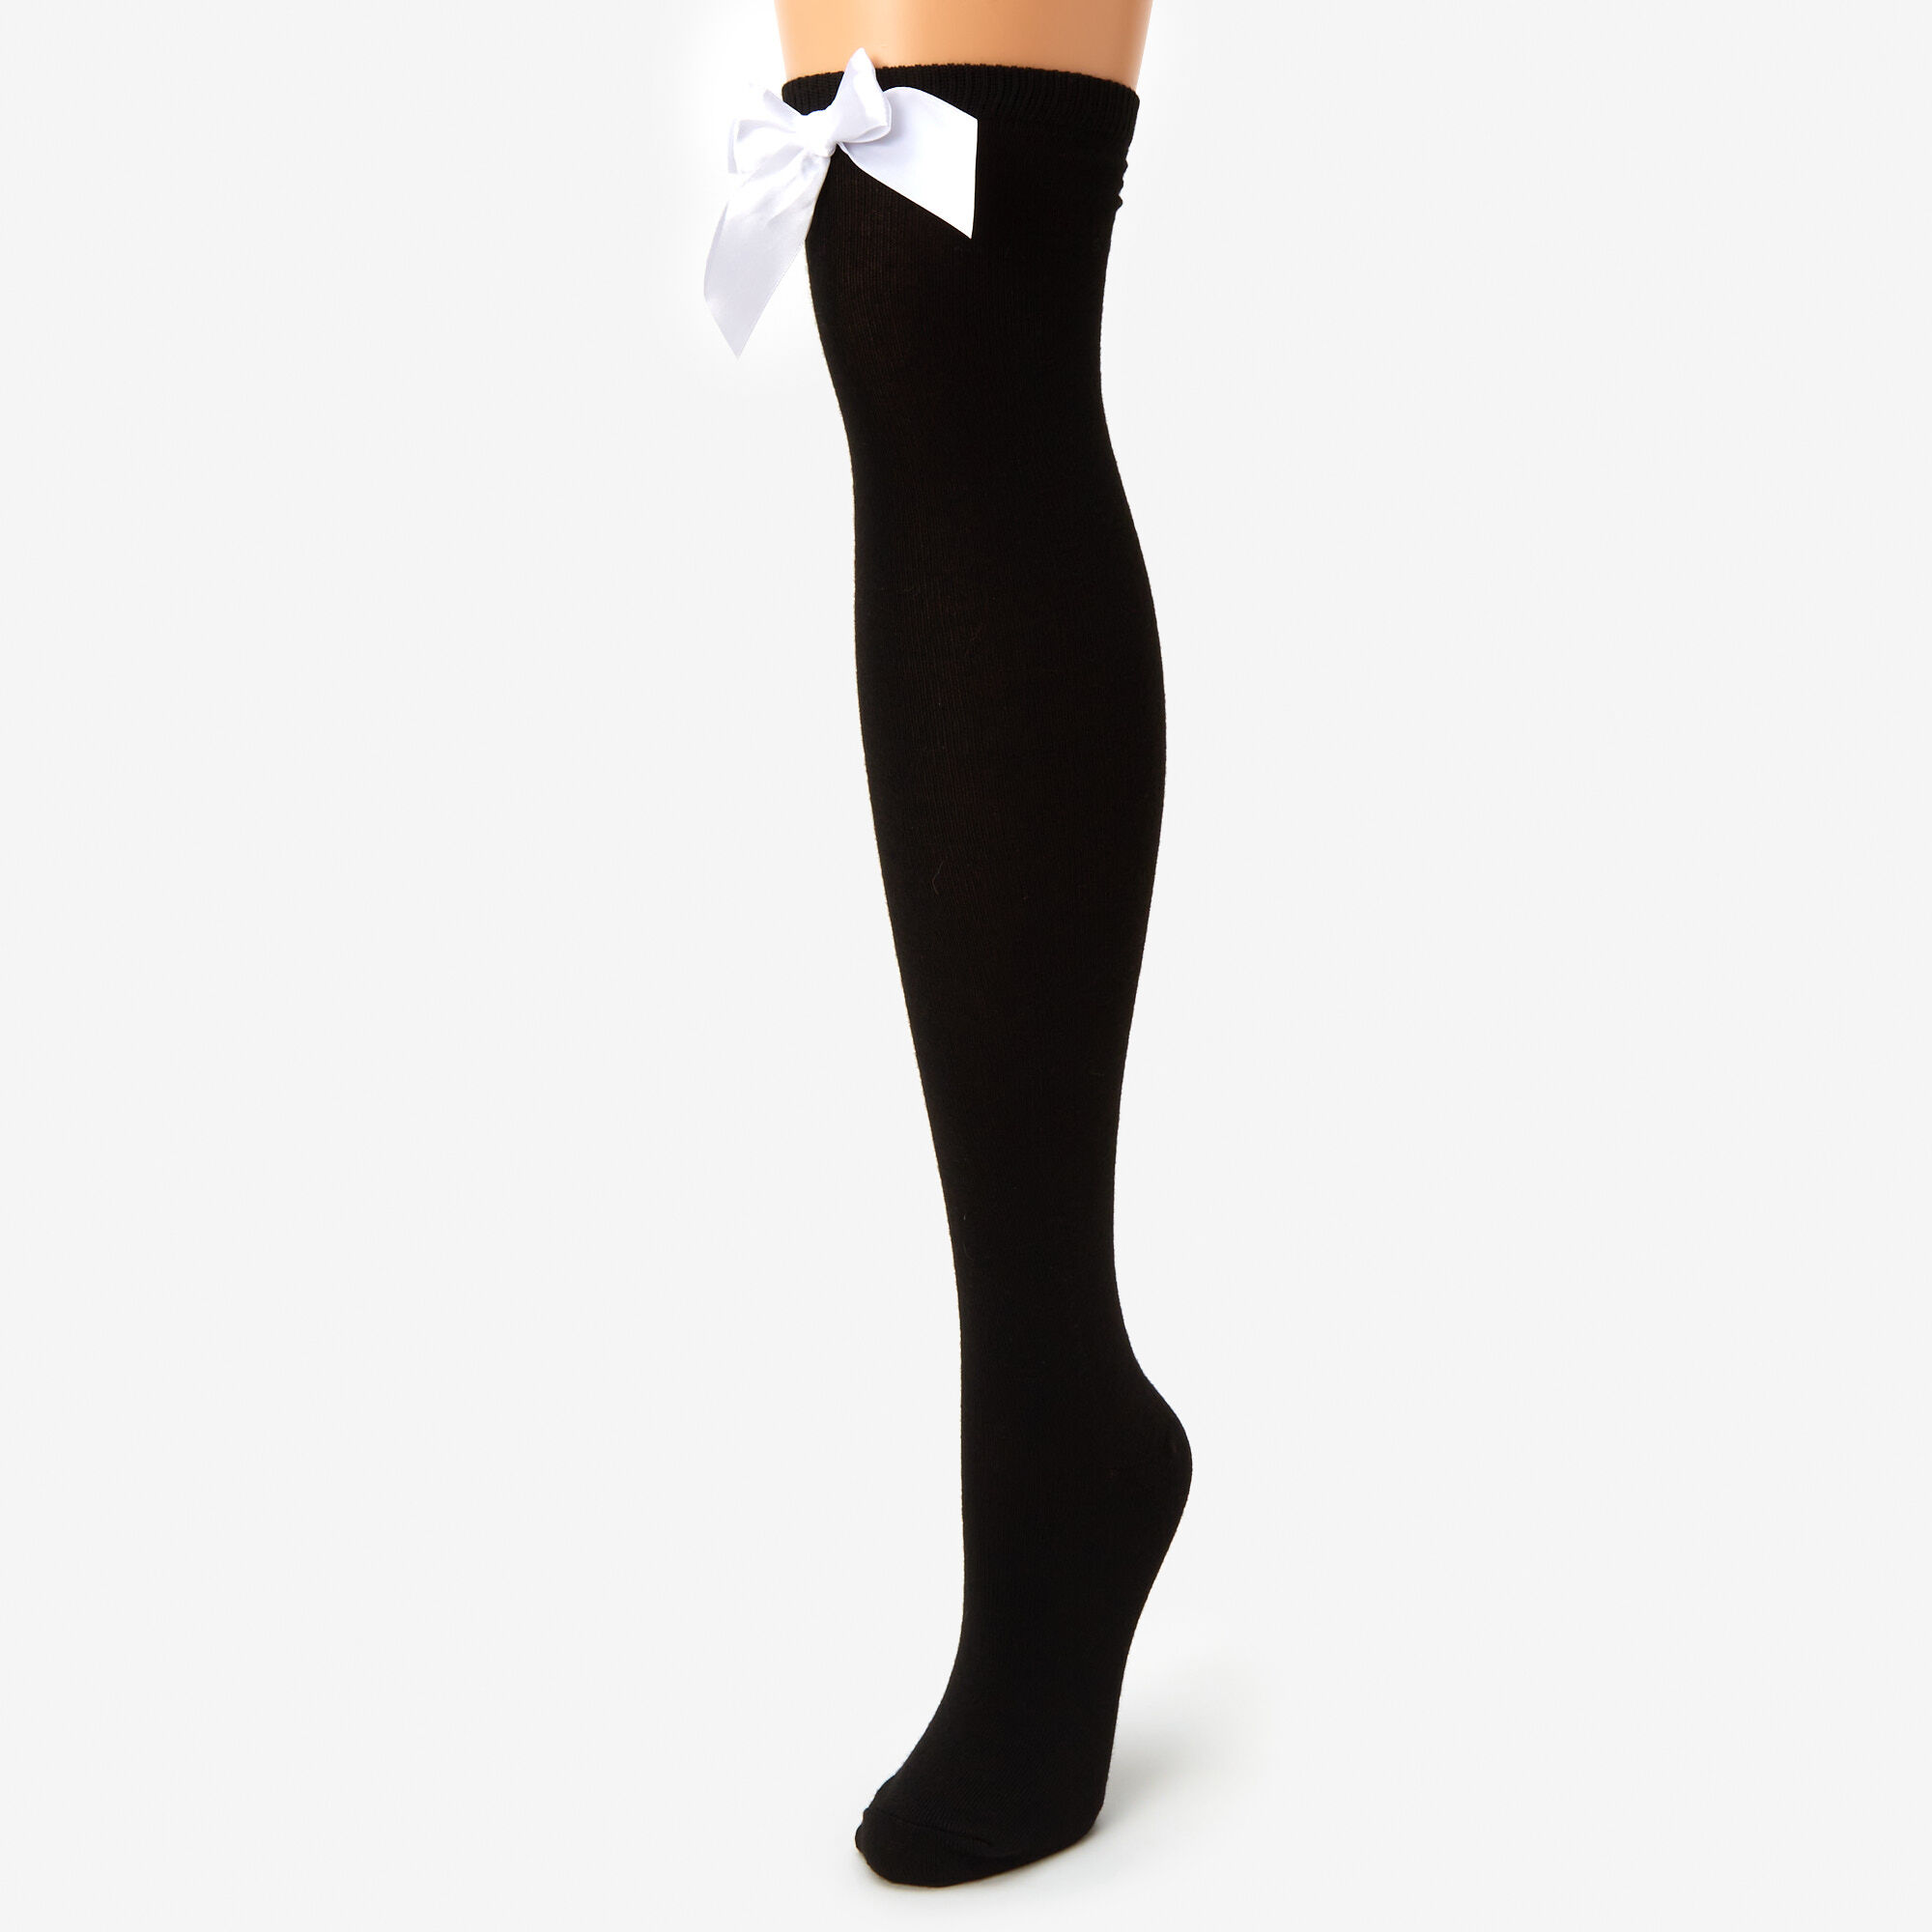 View Claires Black Over The Knee Bow Socks White information